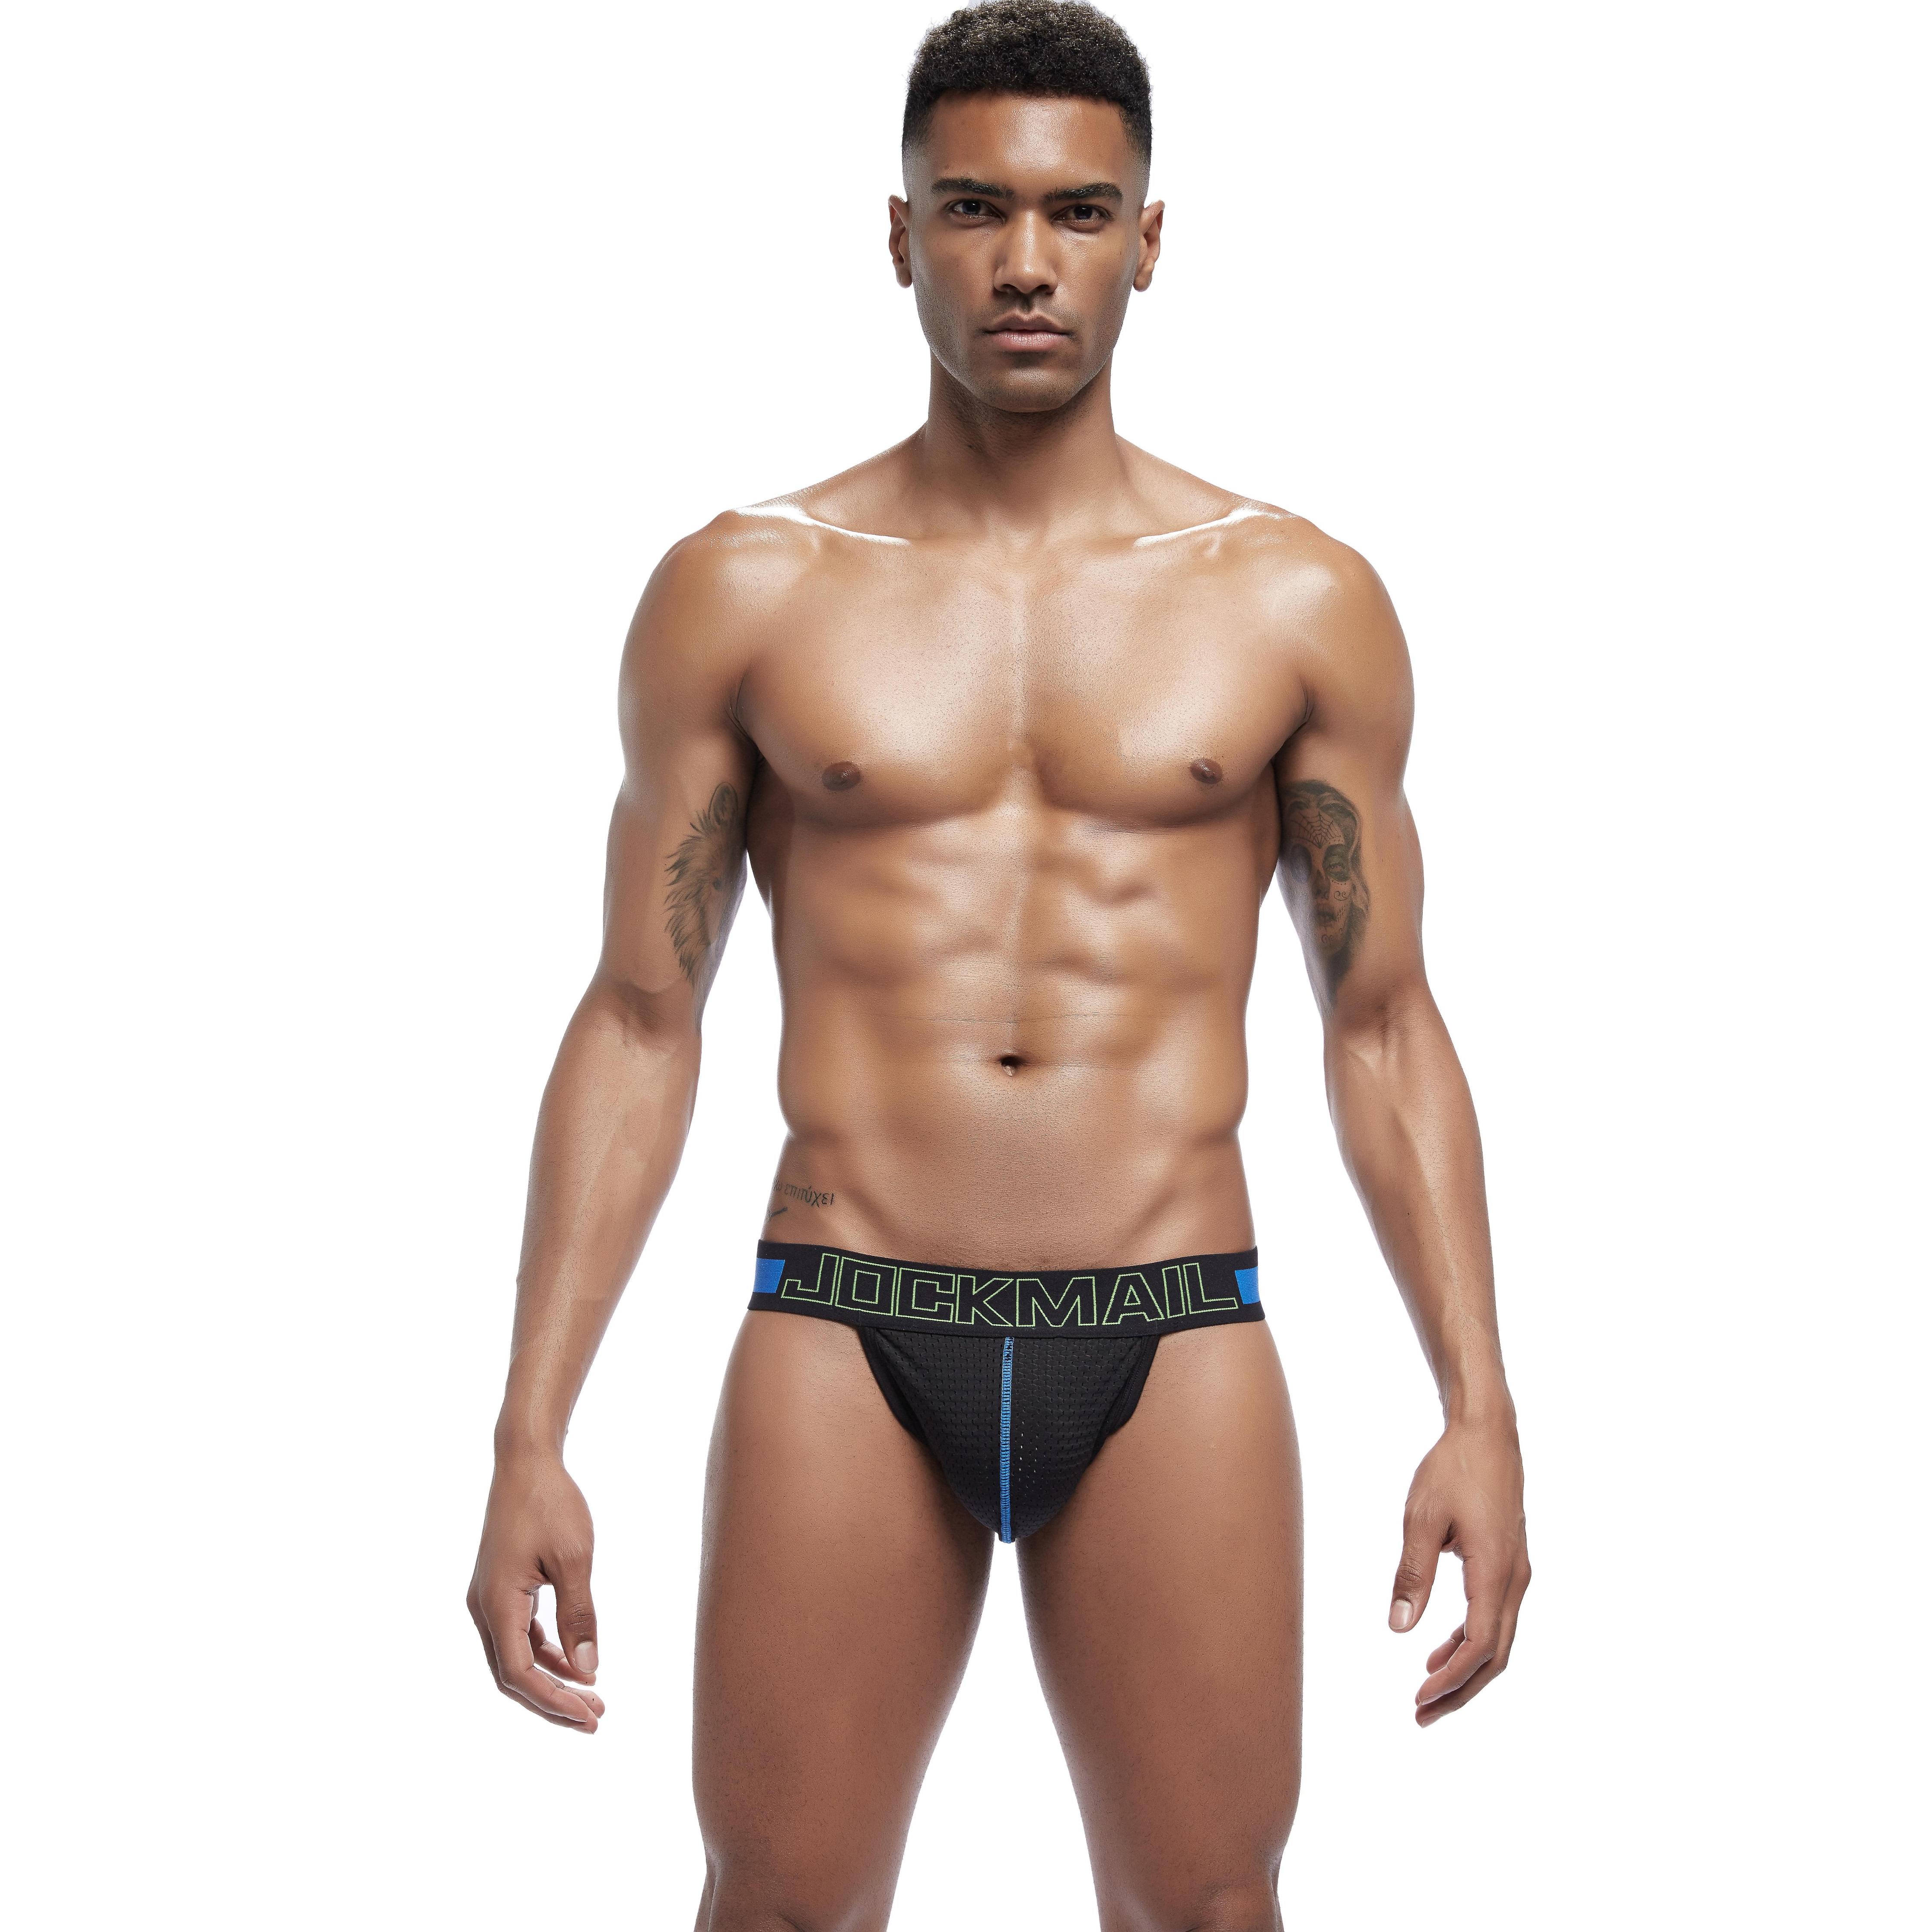 Cuecas Jockmail Brand Mens Roupa Boxadores Trunks Sexy Push Up Cup